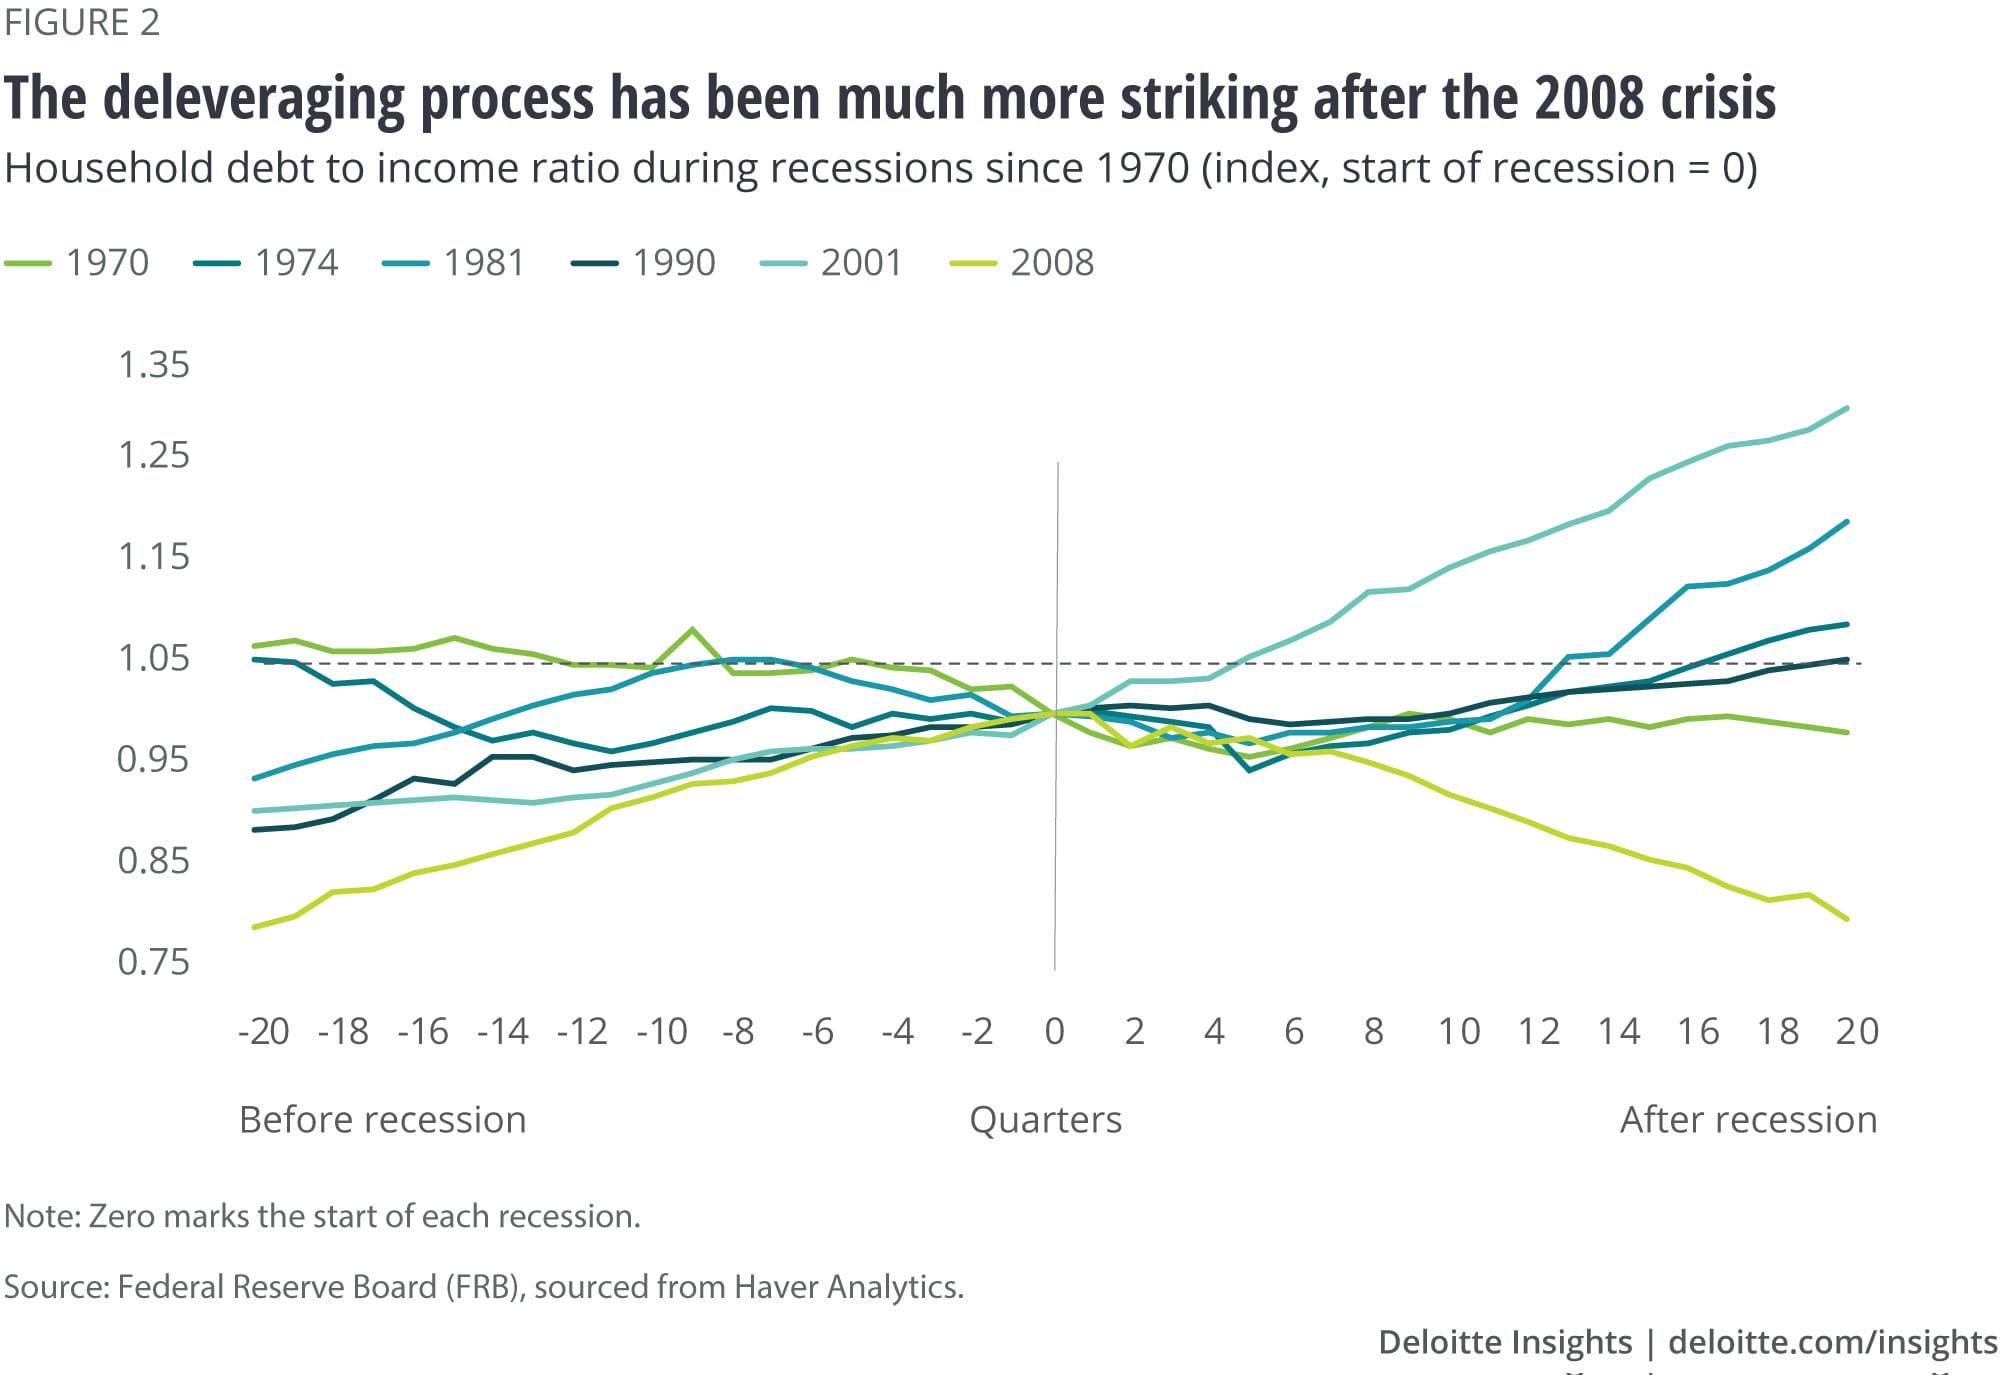 The deleveraging process has been much more striking after the 2008 crisis